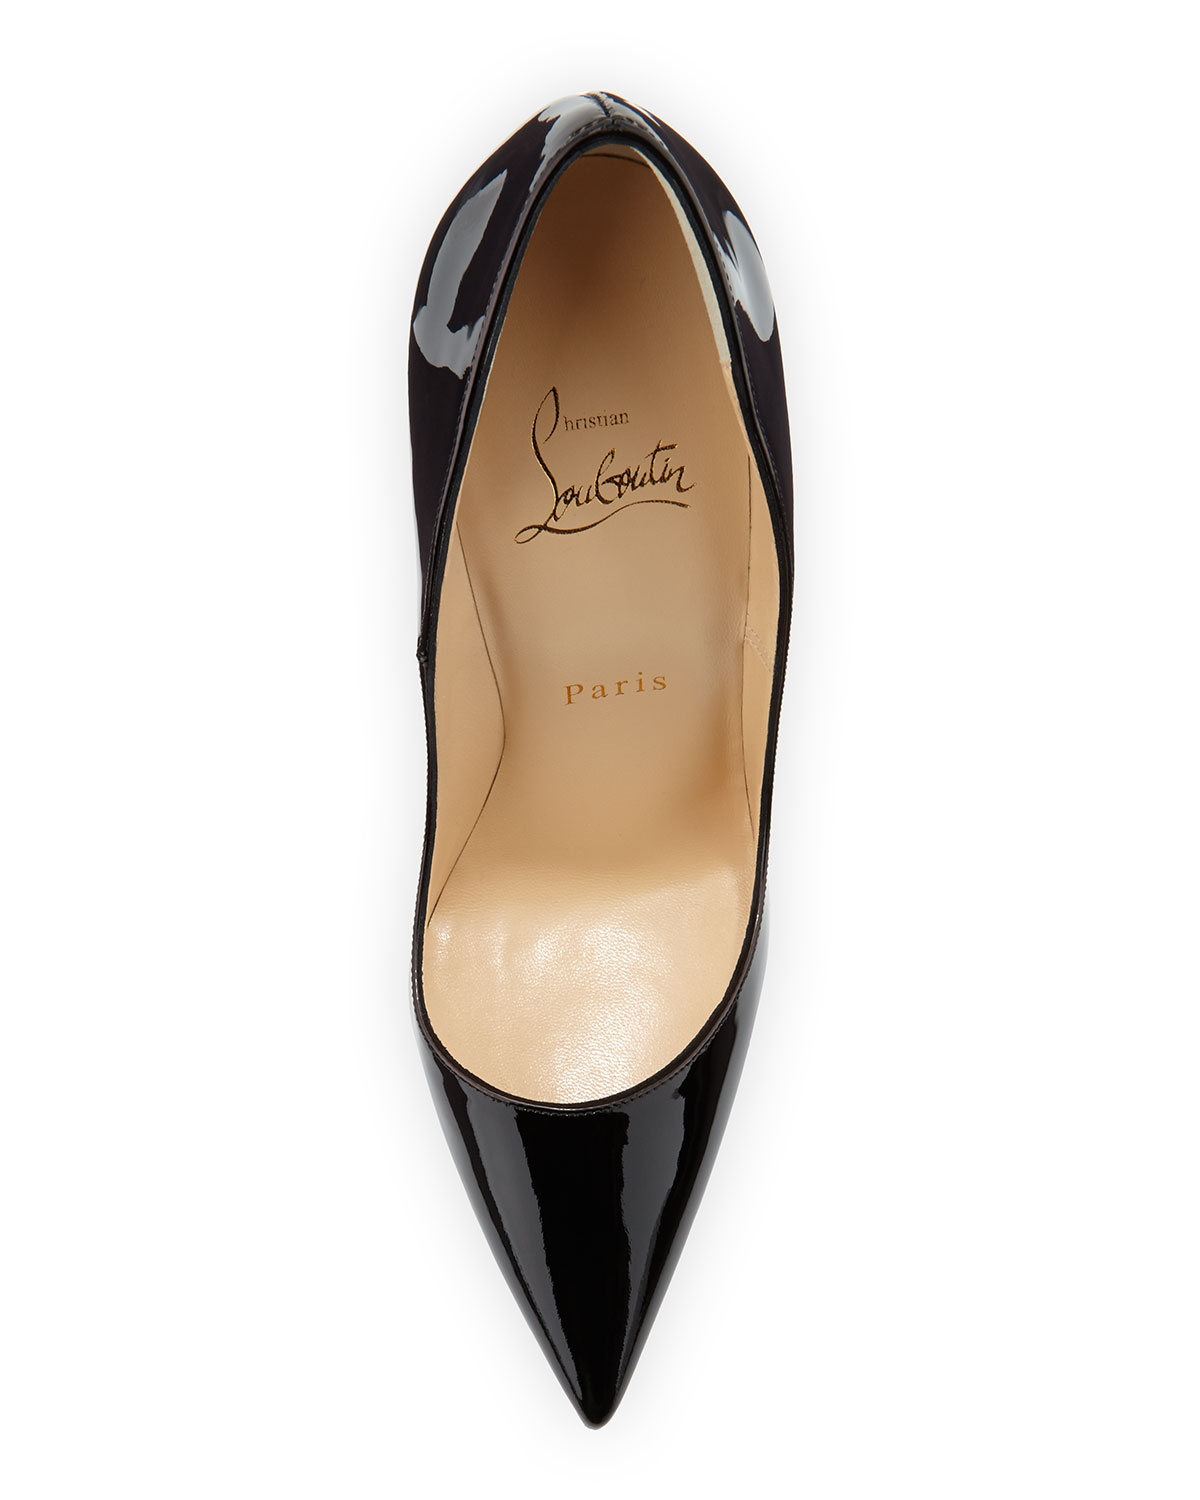 Lyst - Christian Louboutin So Kate Patent Red Sole Pump in Black